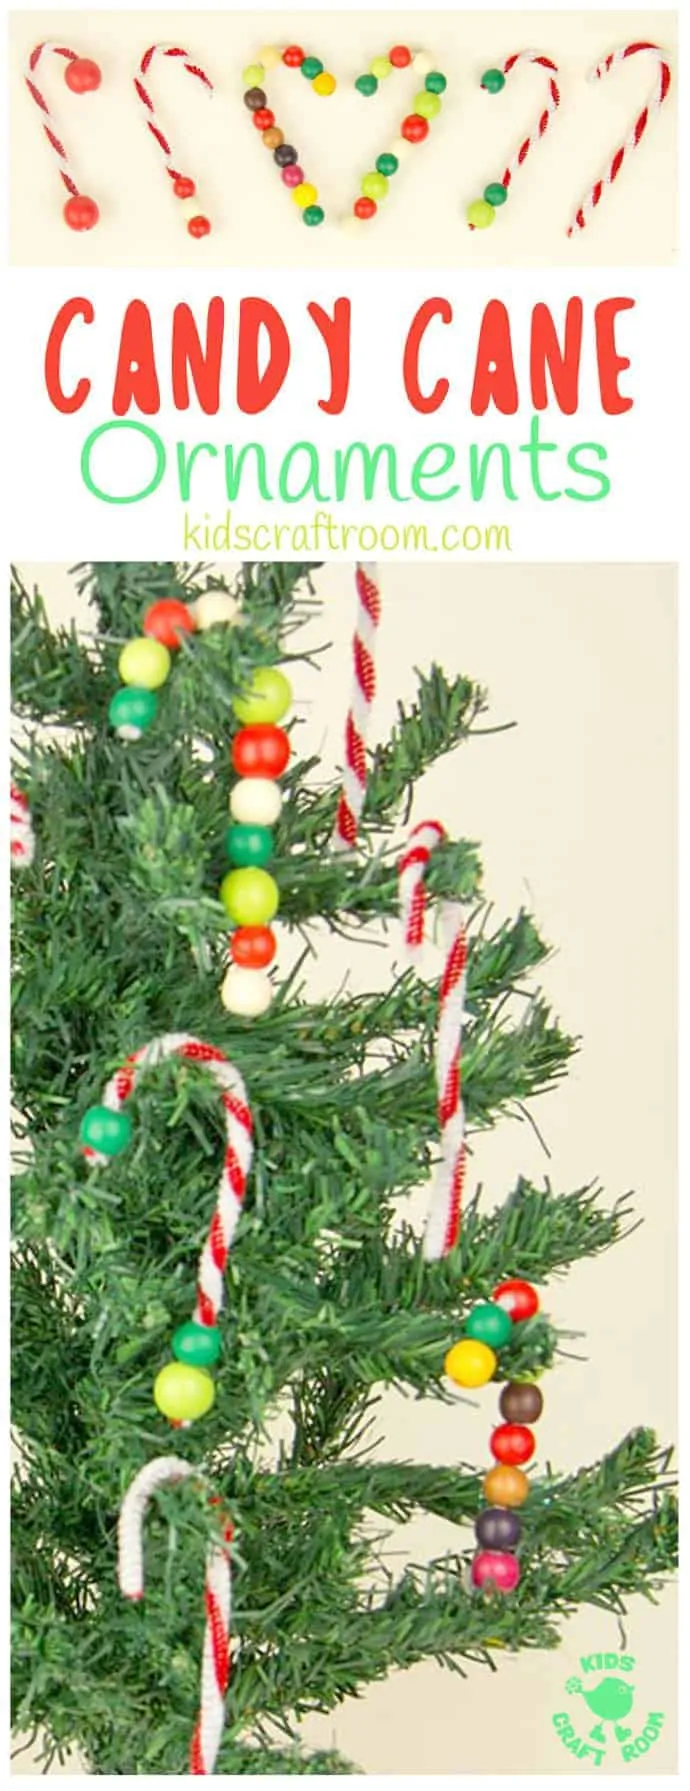 DIY CANDY CANE TREE ORNAMENTS - this pipecleaner and bead Christmas craft for kids is super simple and easy and lots of fun. Make lots of cute candy canes to decorate the Christmas tree. #christmas #christmascrafts #christmascraftsforkids #ornaments #candycane #kidscrafts #kidscrafts101 #kidscraftroom #christmasforkids #kidsactivities #finemotor